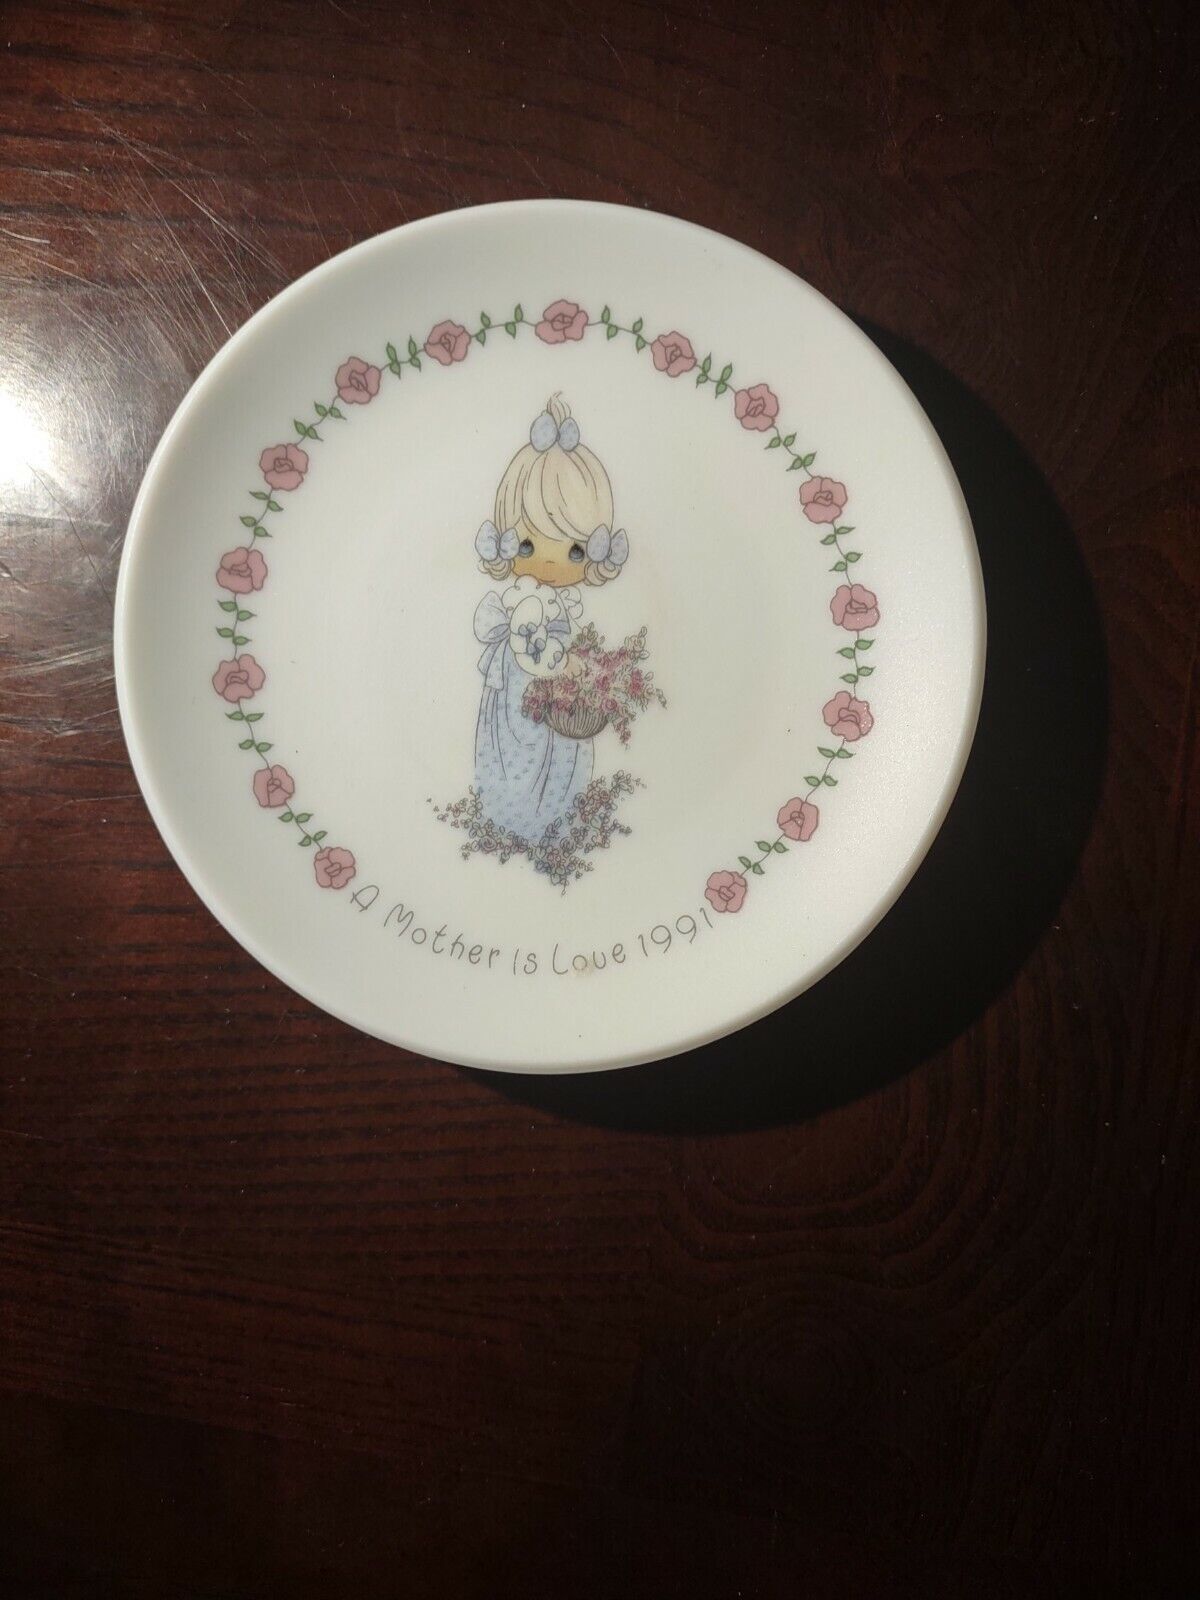 A Mother Is Love 1991 Precious Moments tea saucer - $20.67